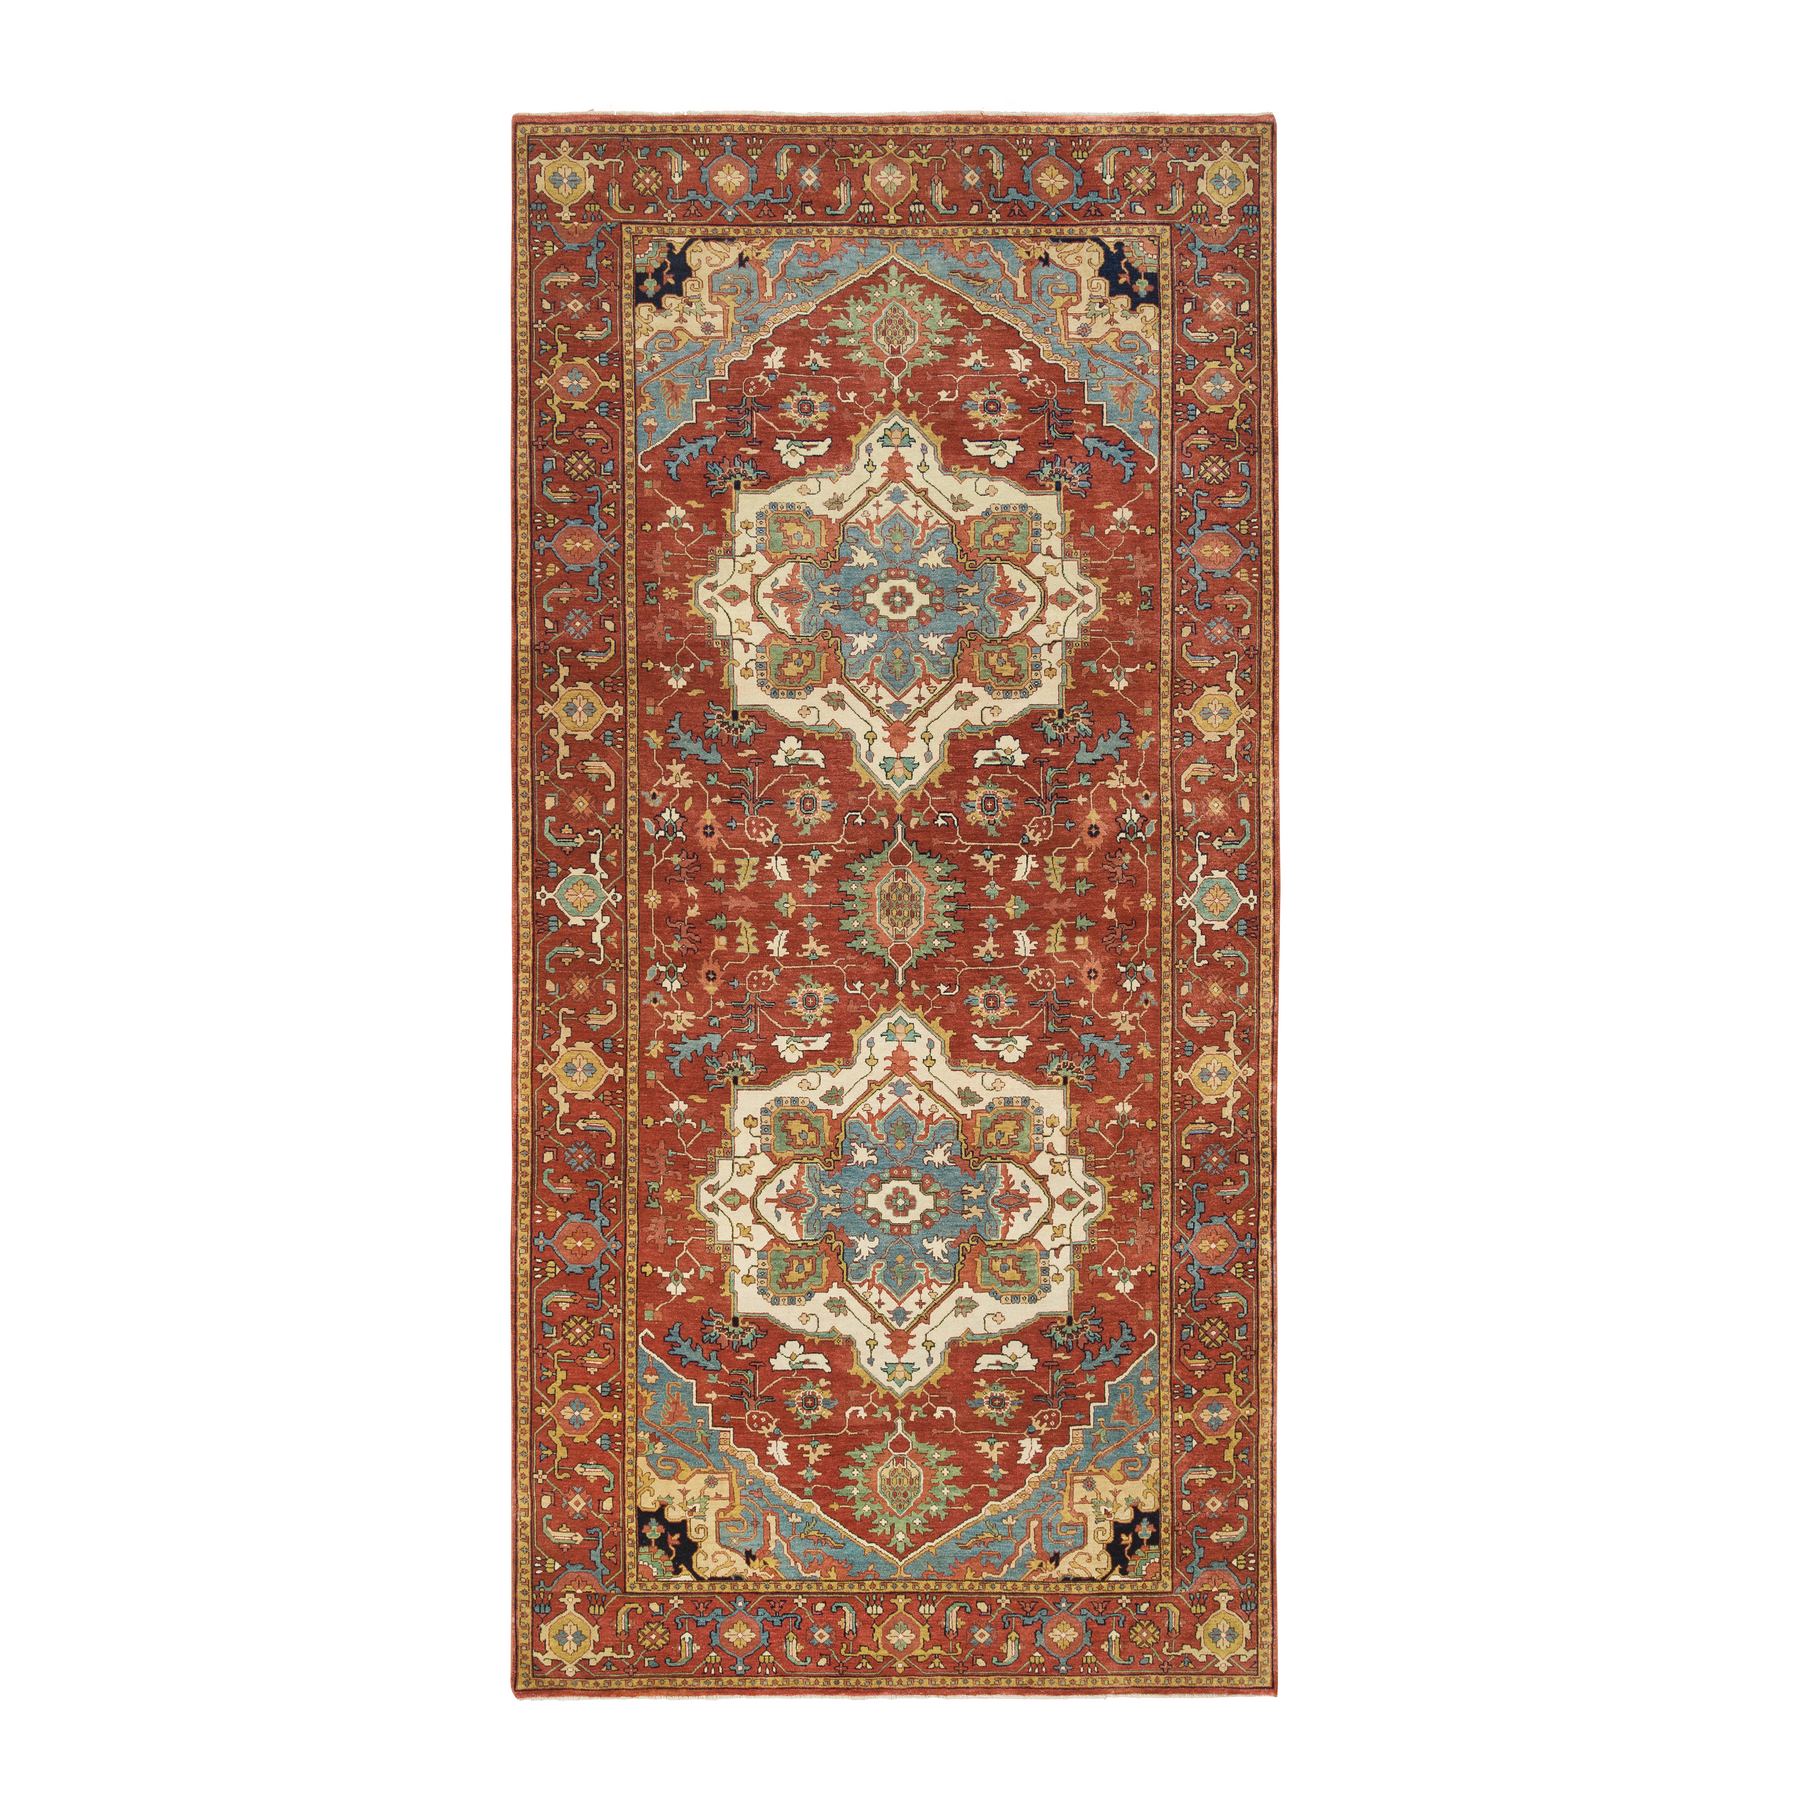  Wool Hand-Knotted Area Rug 5'10